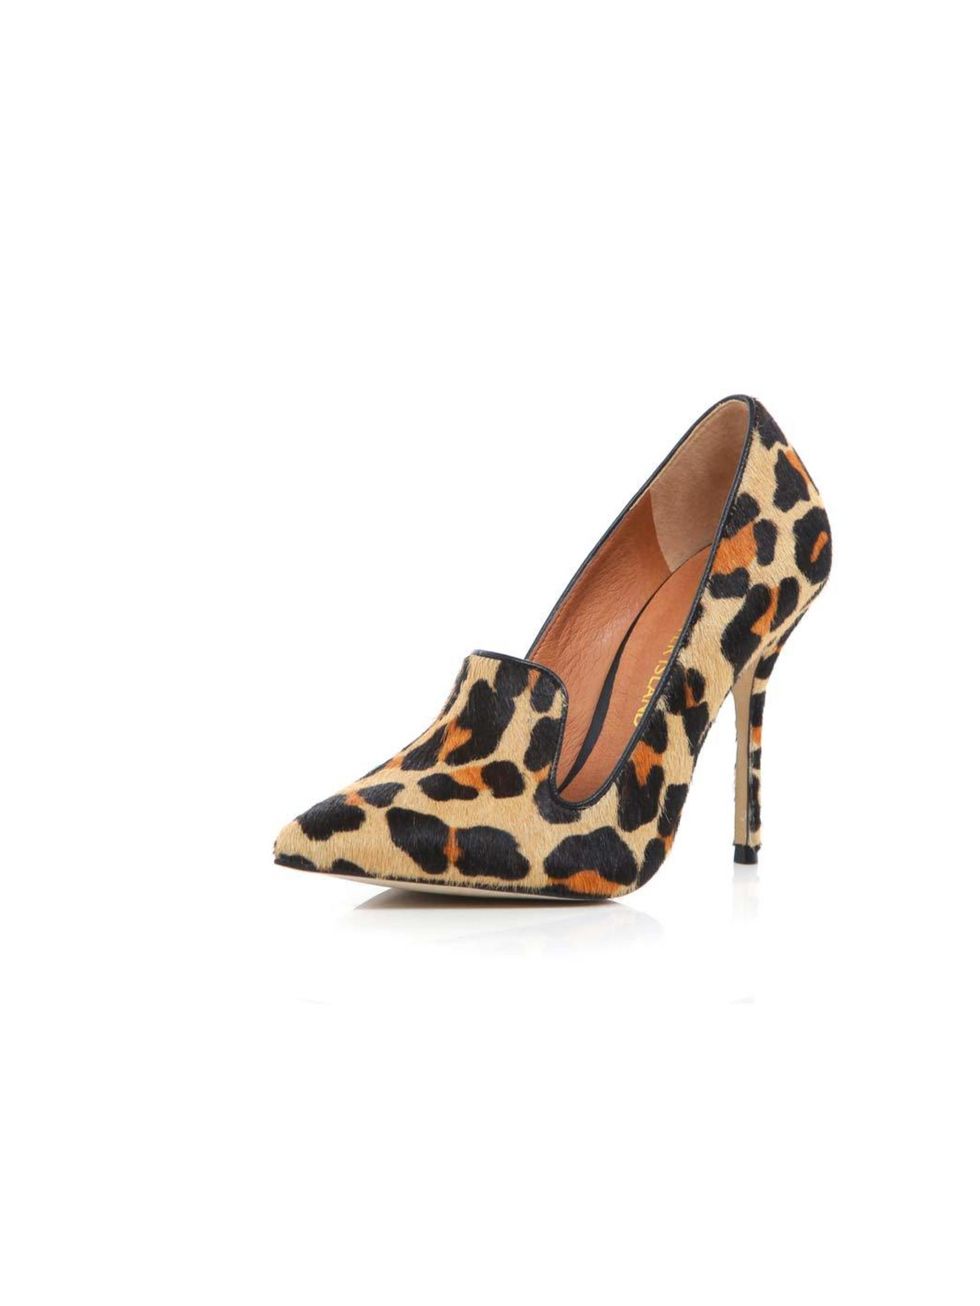 <p>River Island is my go-to for statement pieces that channel the key new season trends.</p><p>- Sarah Bonser, Fashion Assistant</p><p><a href="http://www.riverisland.com/women/shoes--boots/heels/Brown-leopard-print-hair-slipper-court-shoes-638940">River 